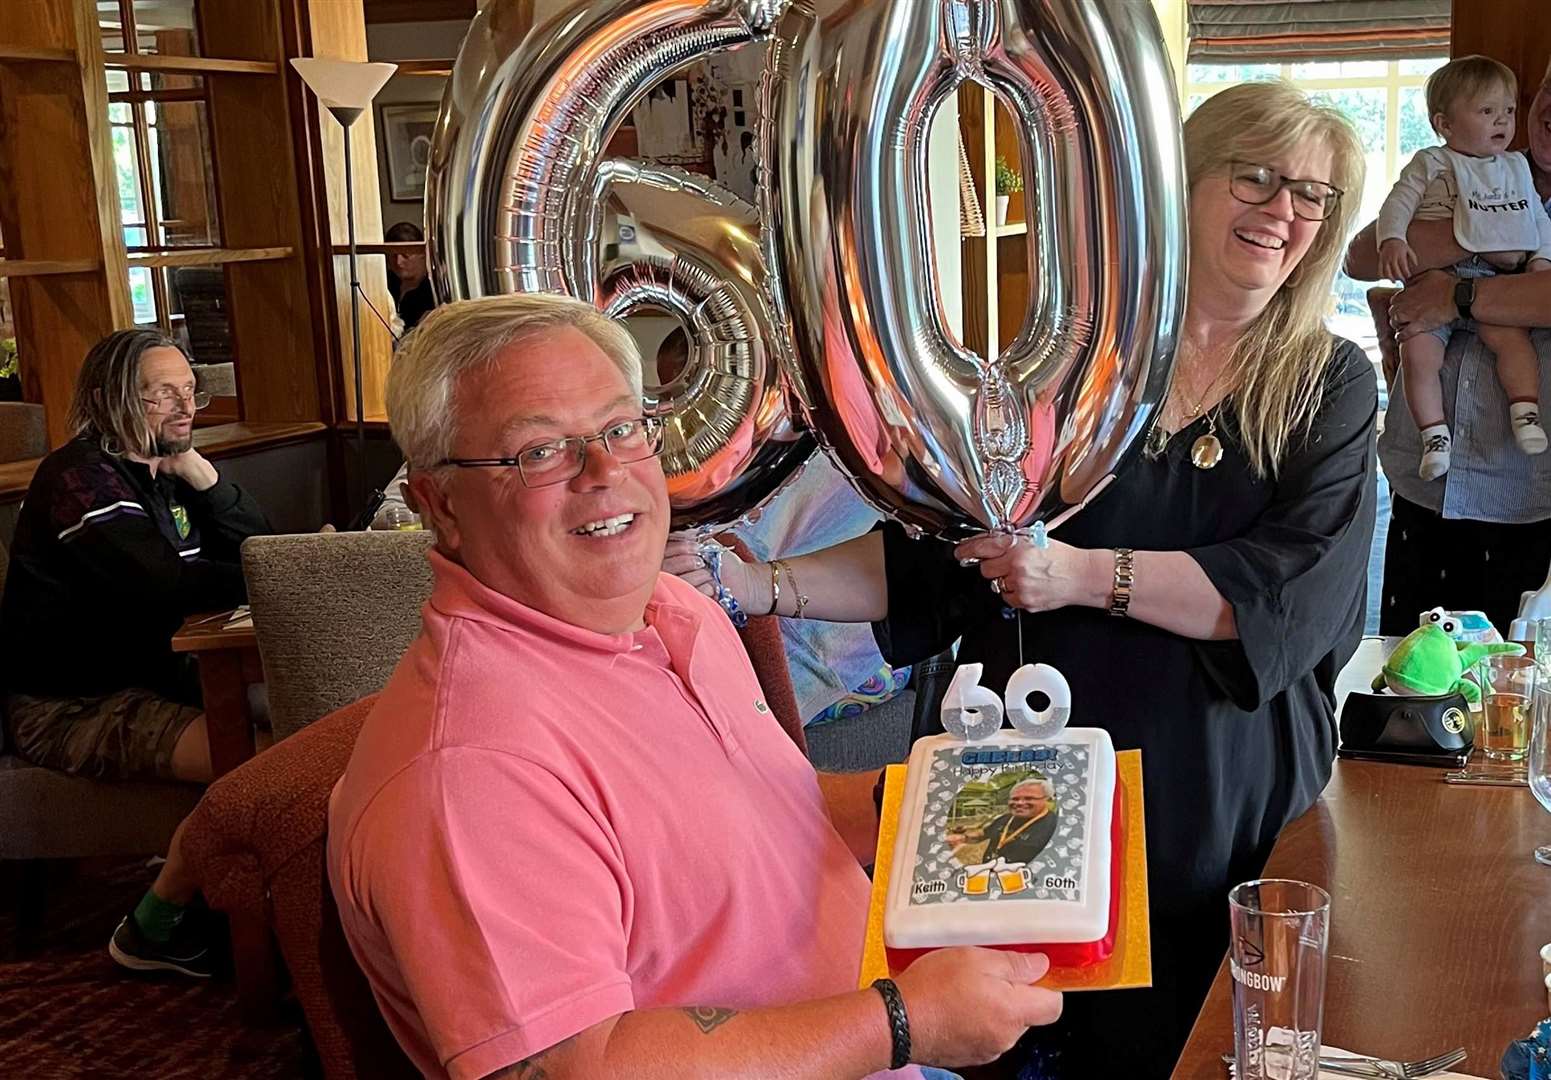 Karen Schulz booked the surprise group meal for her husband Keith’s 60th birthday. Picture: Karen Schulz